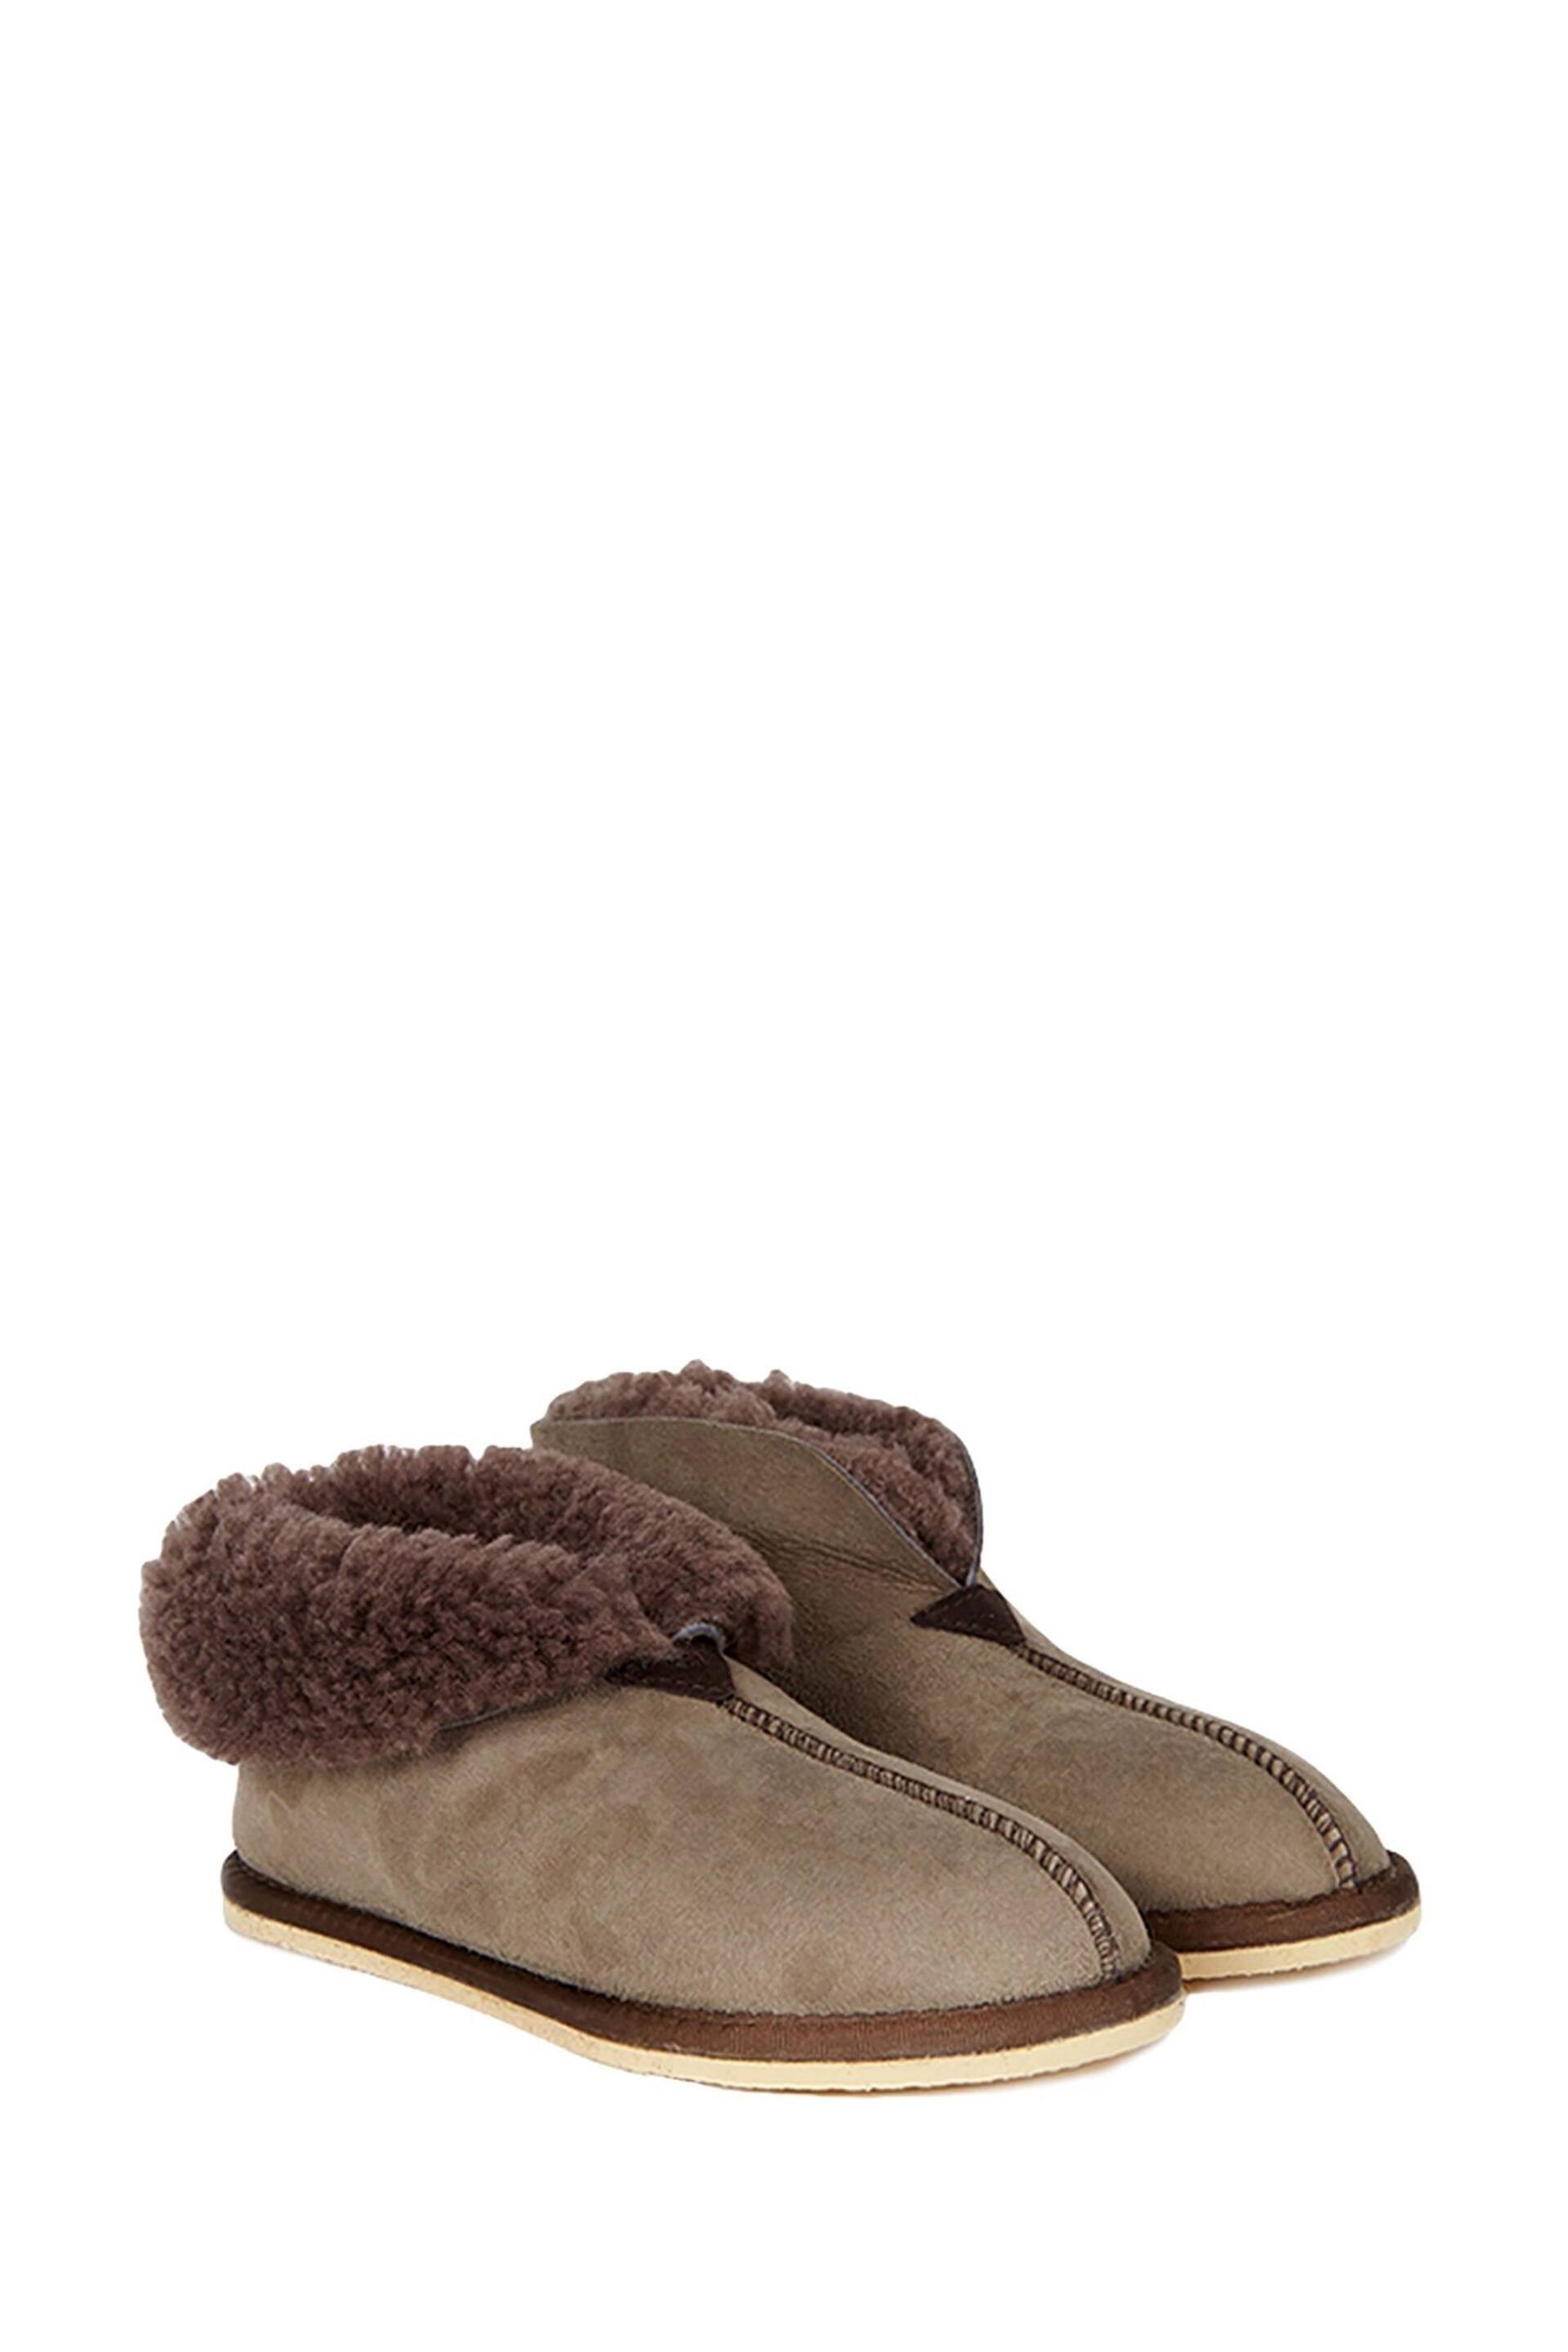 Celtic & Co. Ladies Pink Sheepskin Bootee Slippers - Image 4 of 5